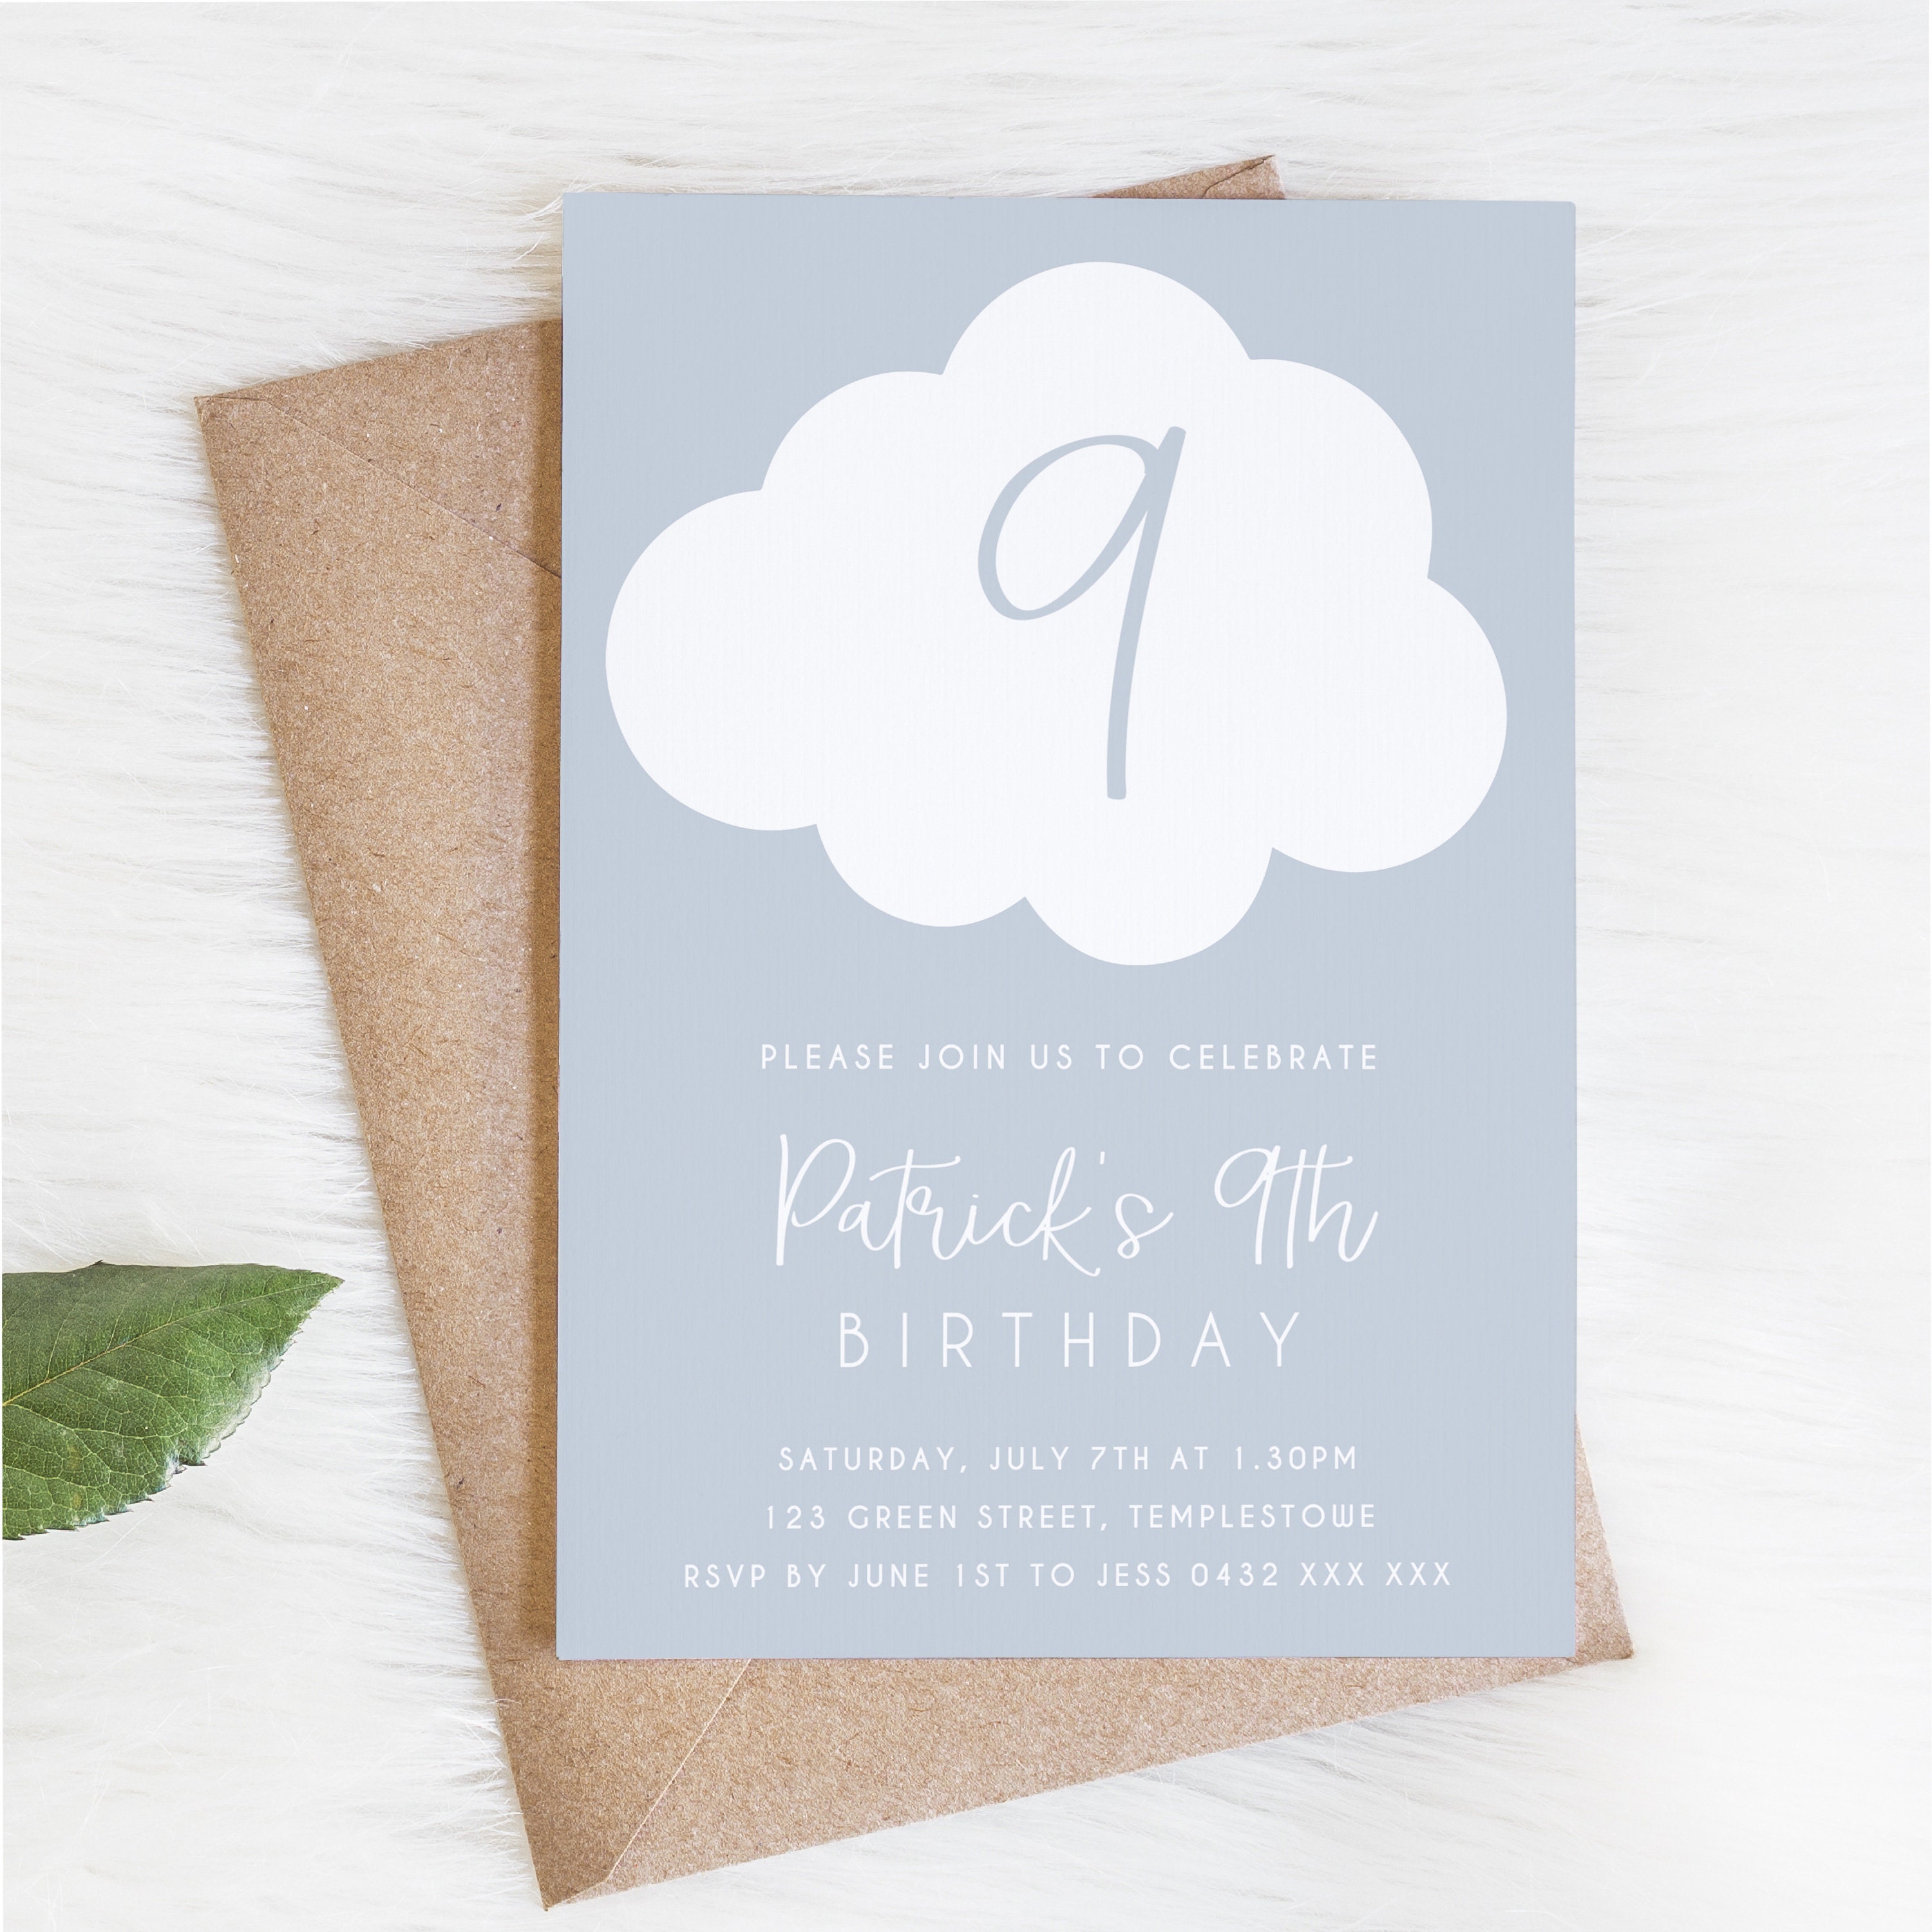 blue-white-cloud-9th-birthday-invitation-instant-download-etsy